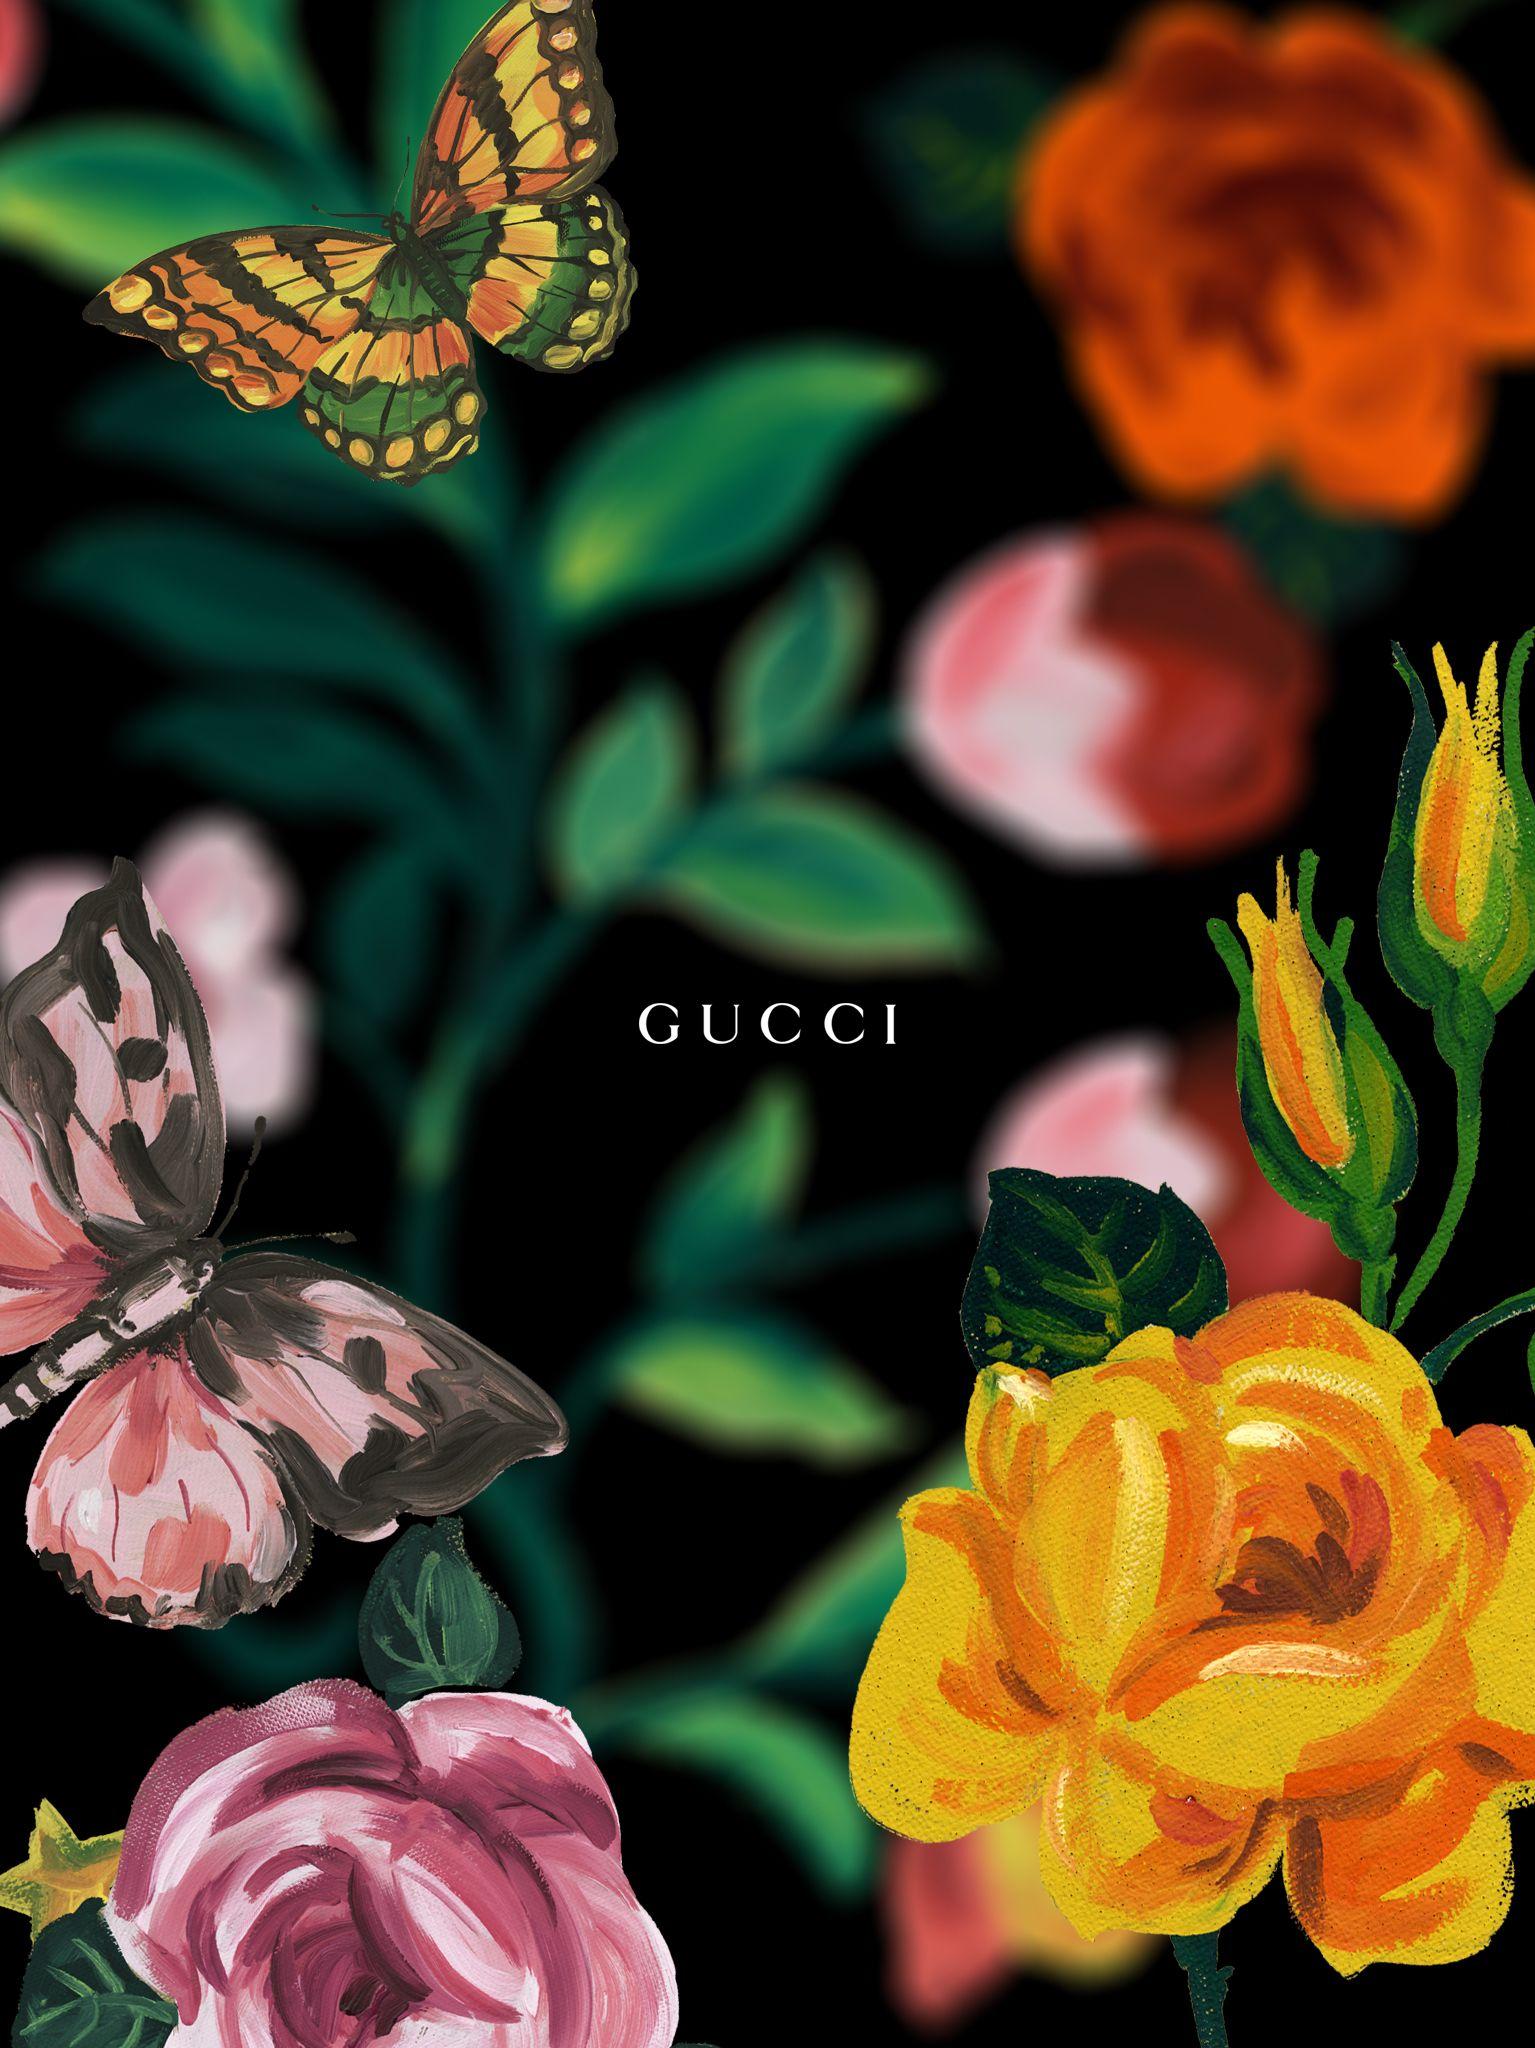 Gucci Tiger Wallpapers Top Free Gucci Tiger Backgrounds Wallpaperaccess